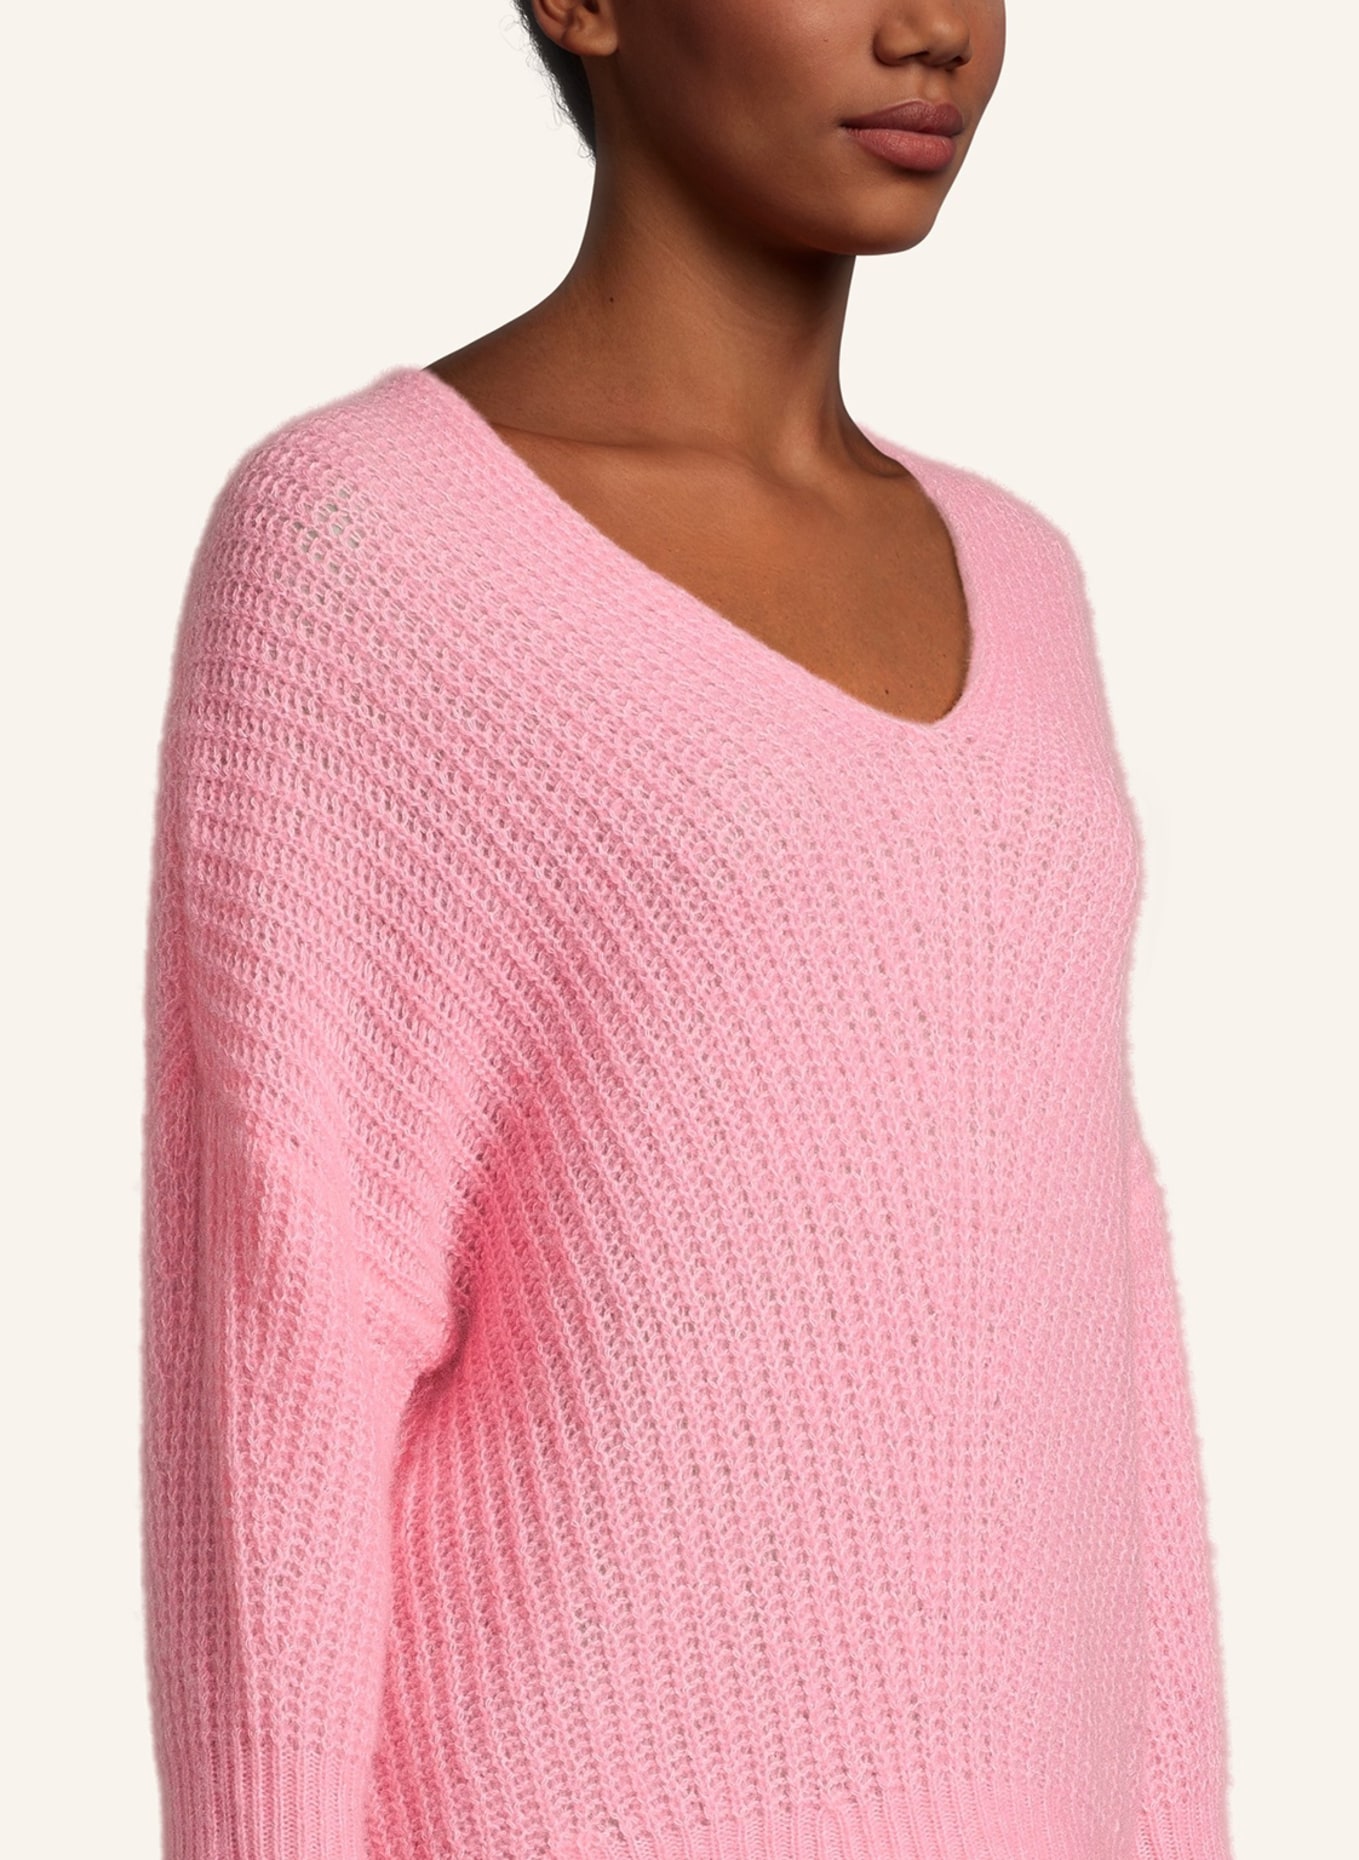 Princess GOES HOLLYWOOD Pullover mit Cashmere, Farbe: PINK (Bild 3)